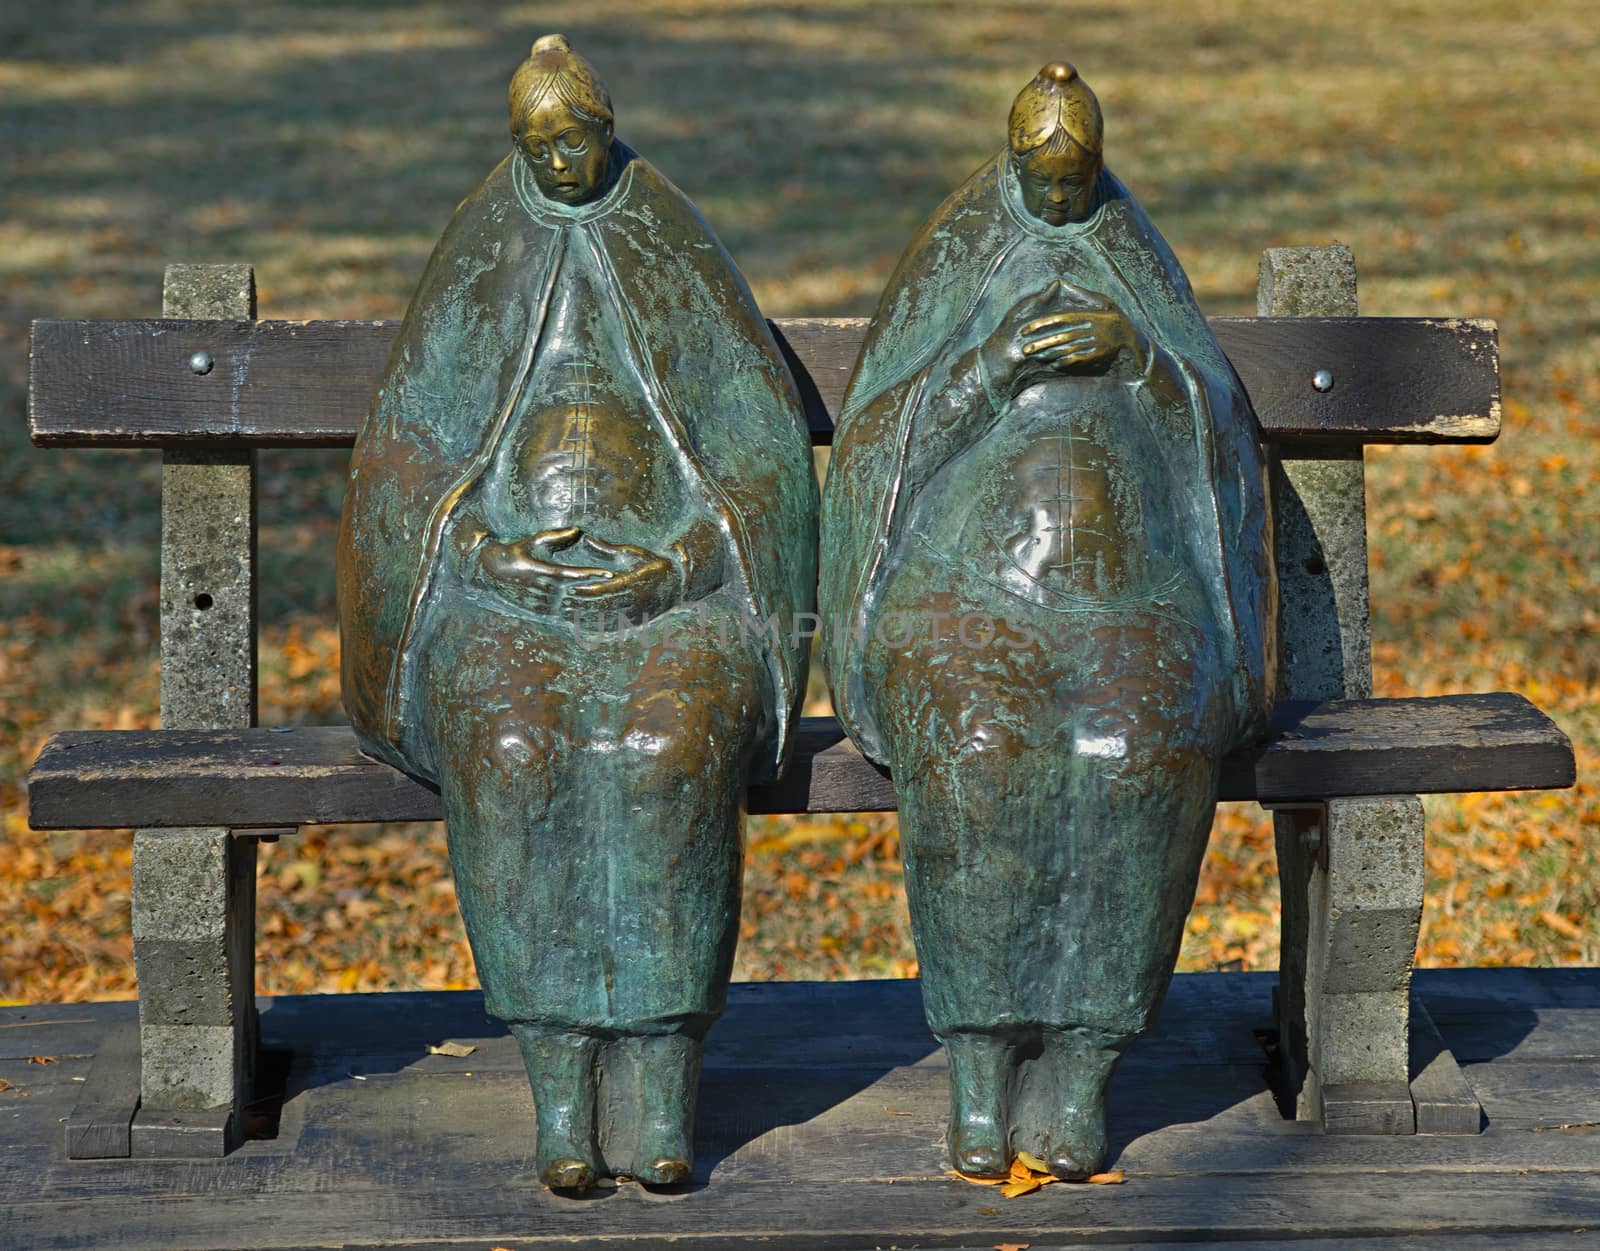 Two women marble figurines sitting on a bench by sheriffkule